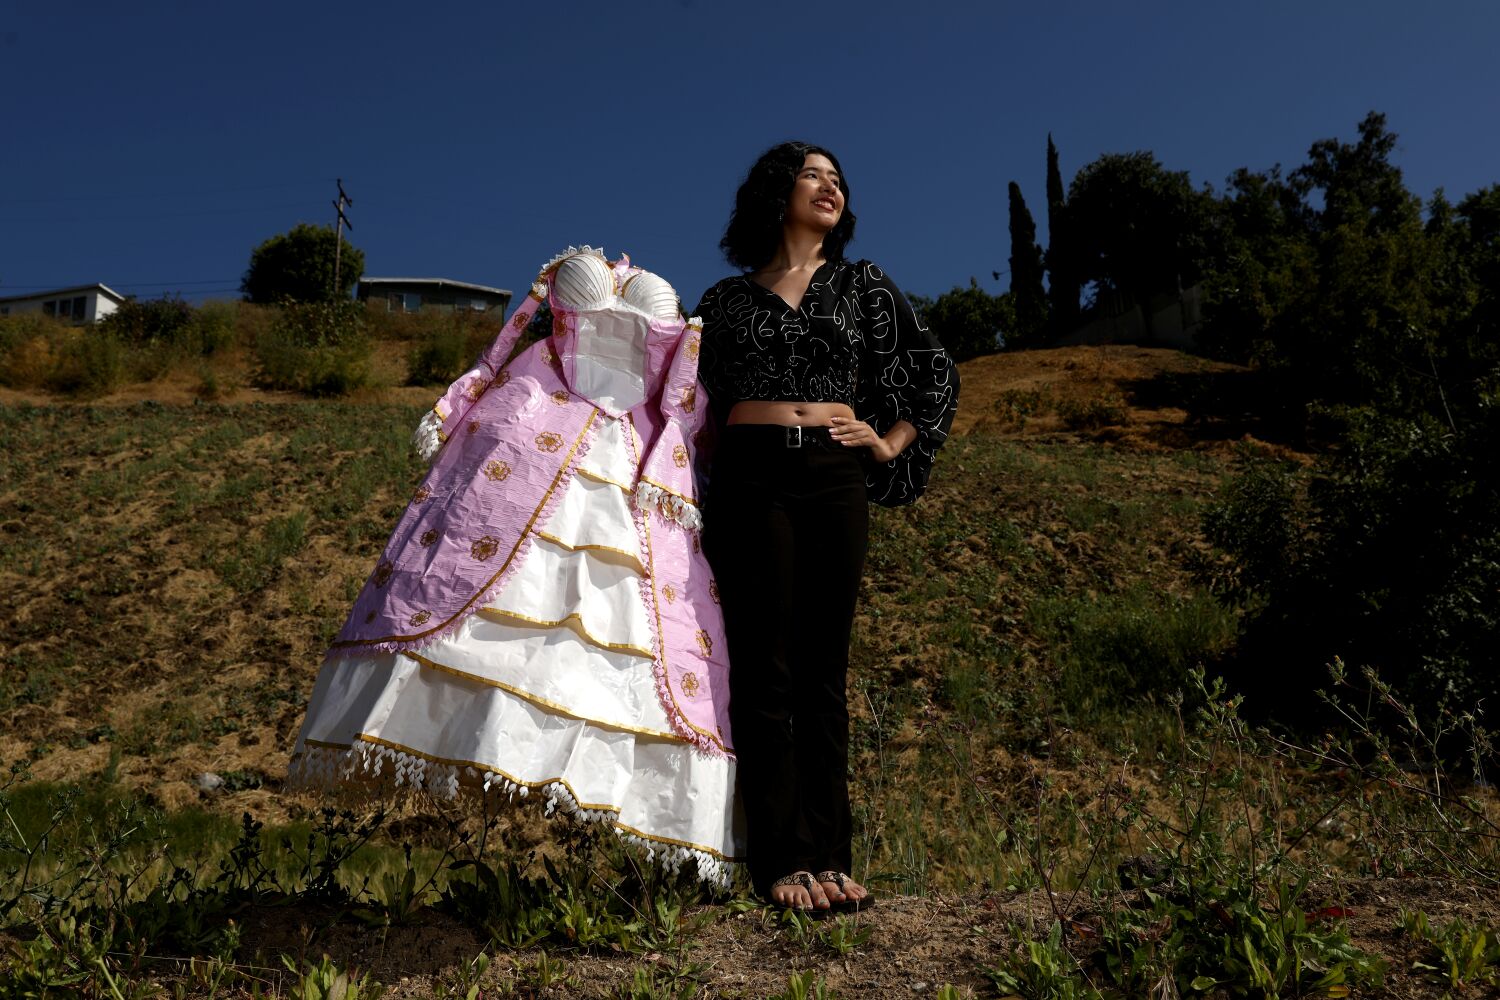 Inspired at the Getty, L.A. teen's duct tape dress among scholarship contest's finalist